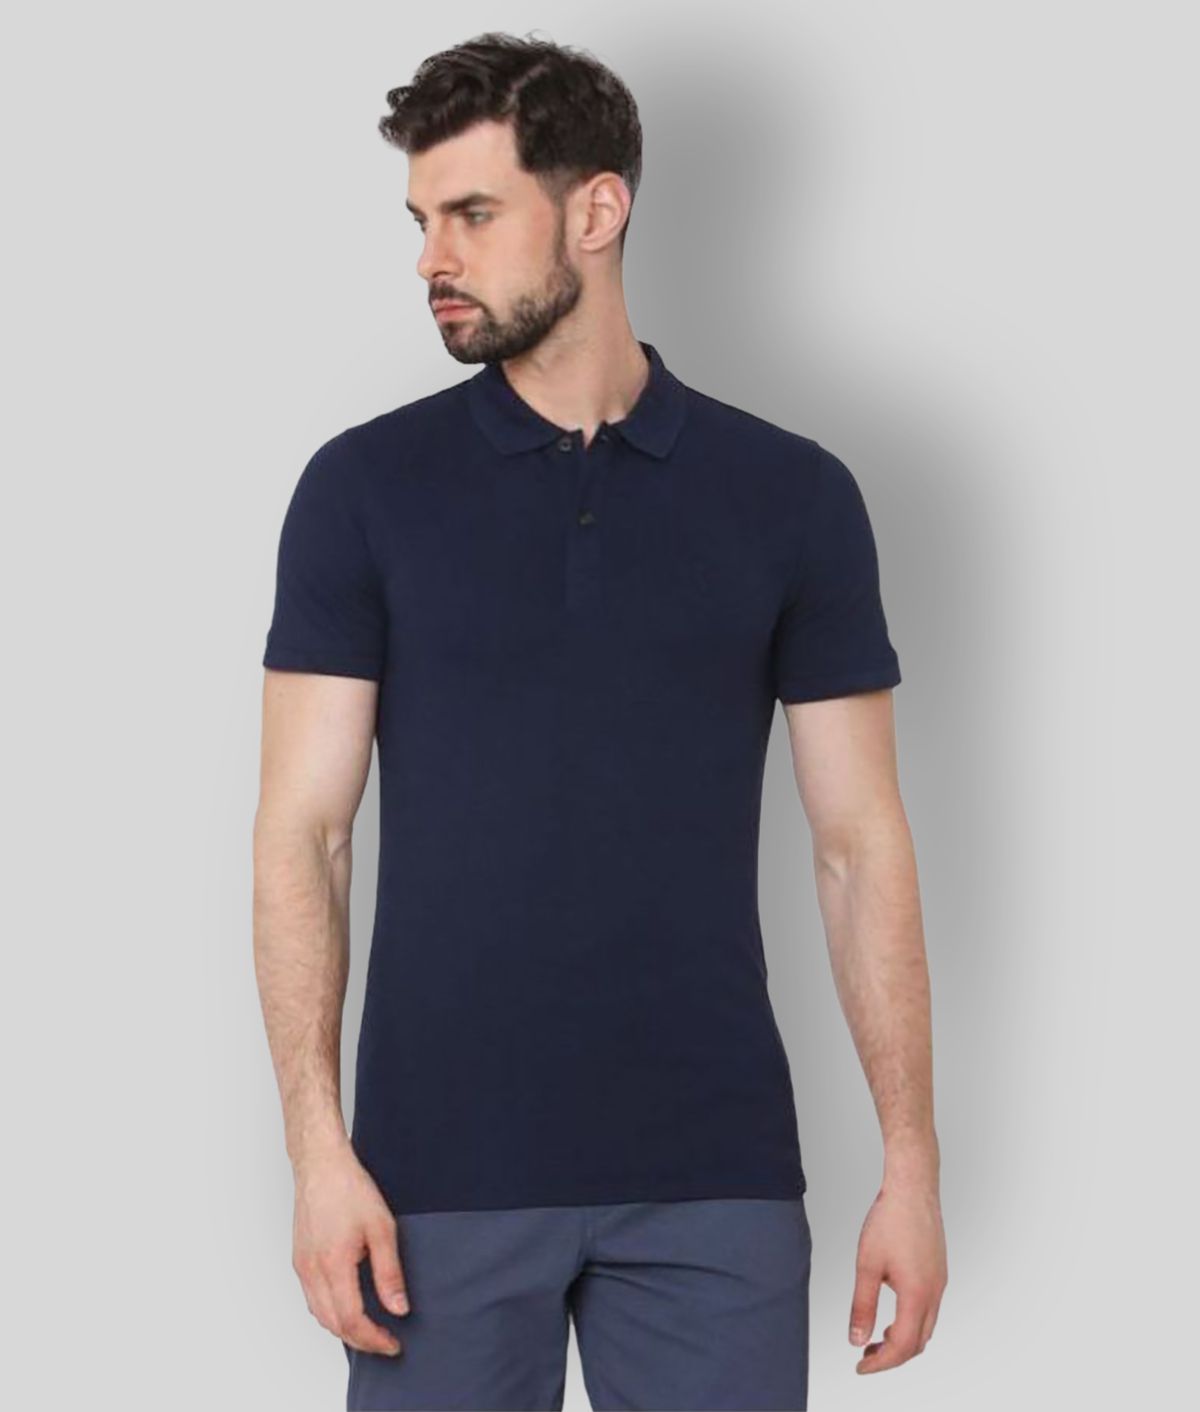     			FASHION365 - Navy Cotton Blend Slim Fit Men's Polo T Shirt ( Pack of 1 )